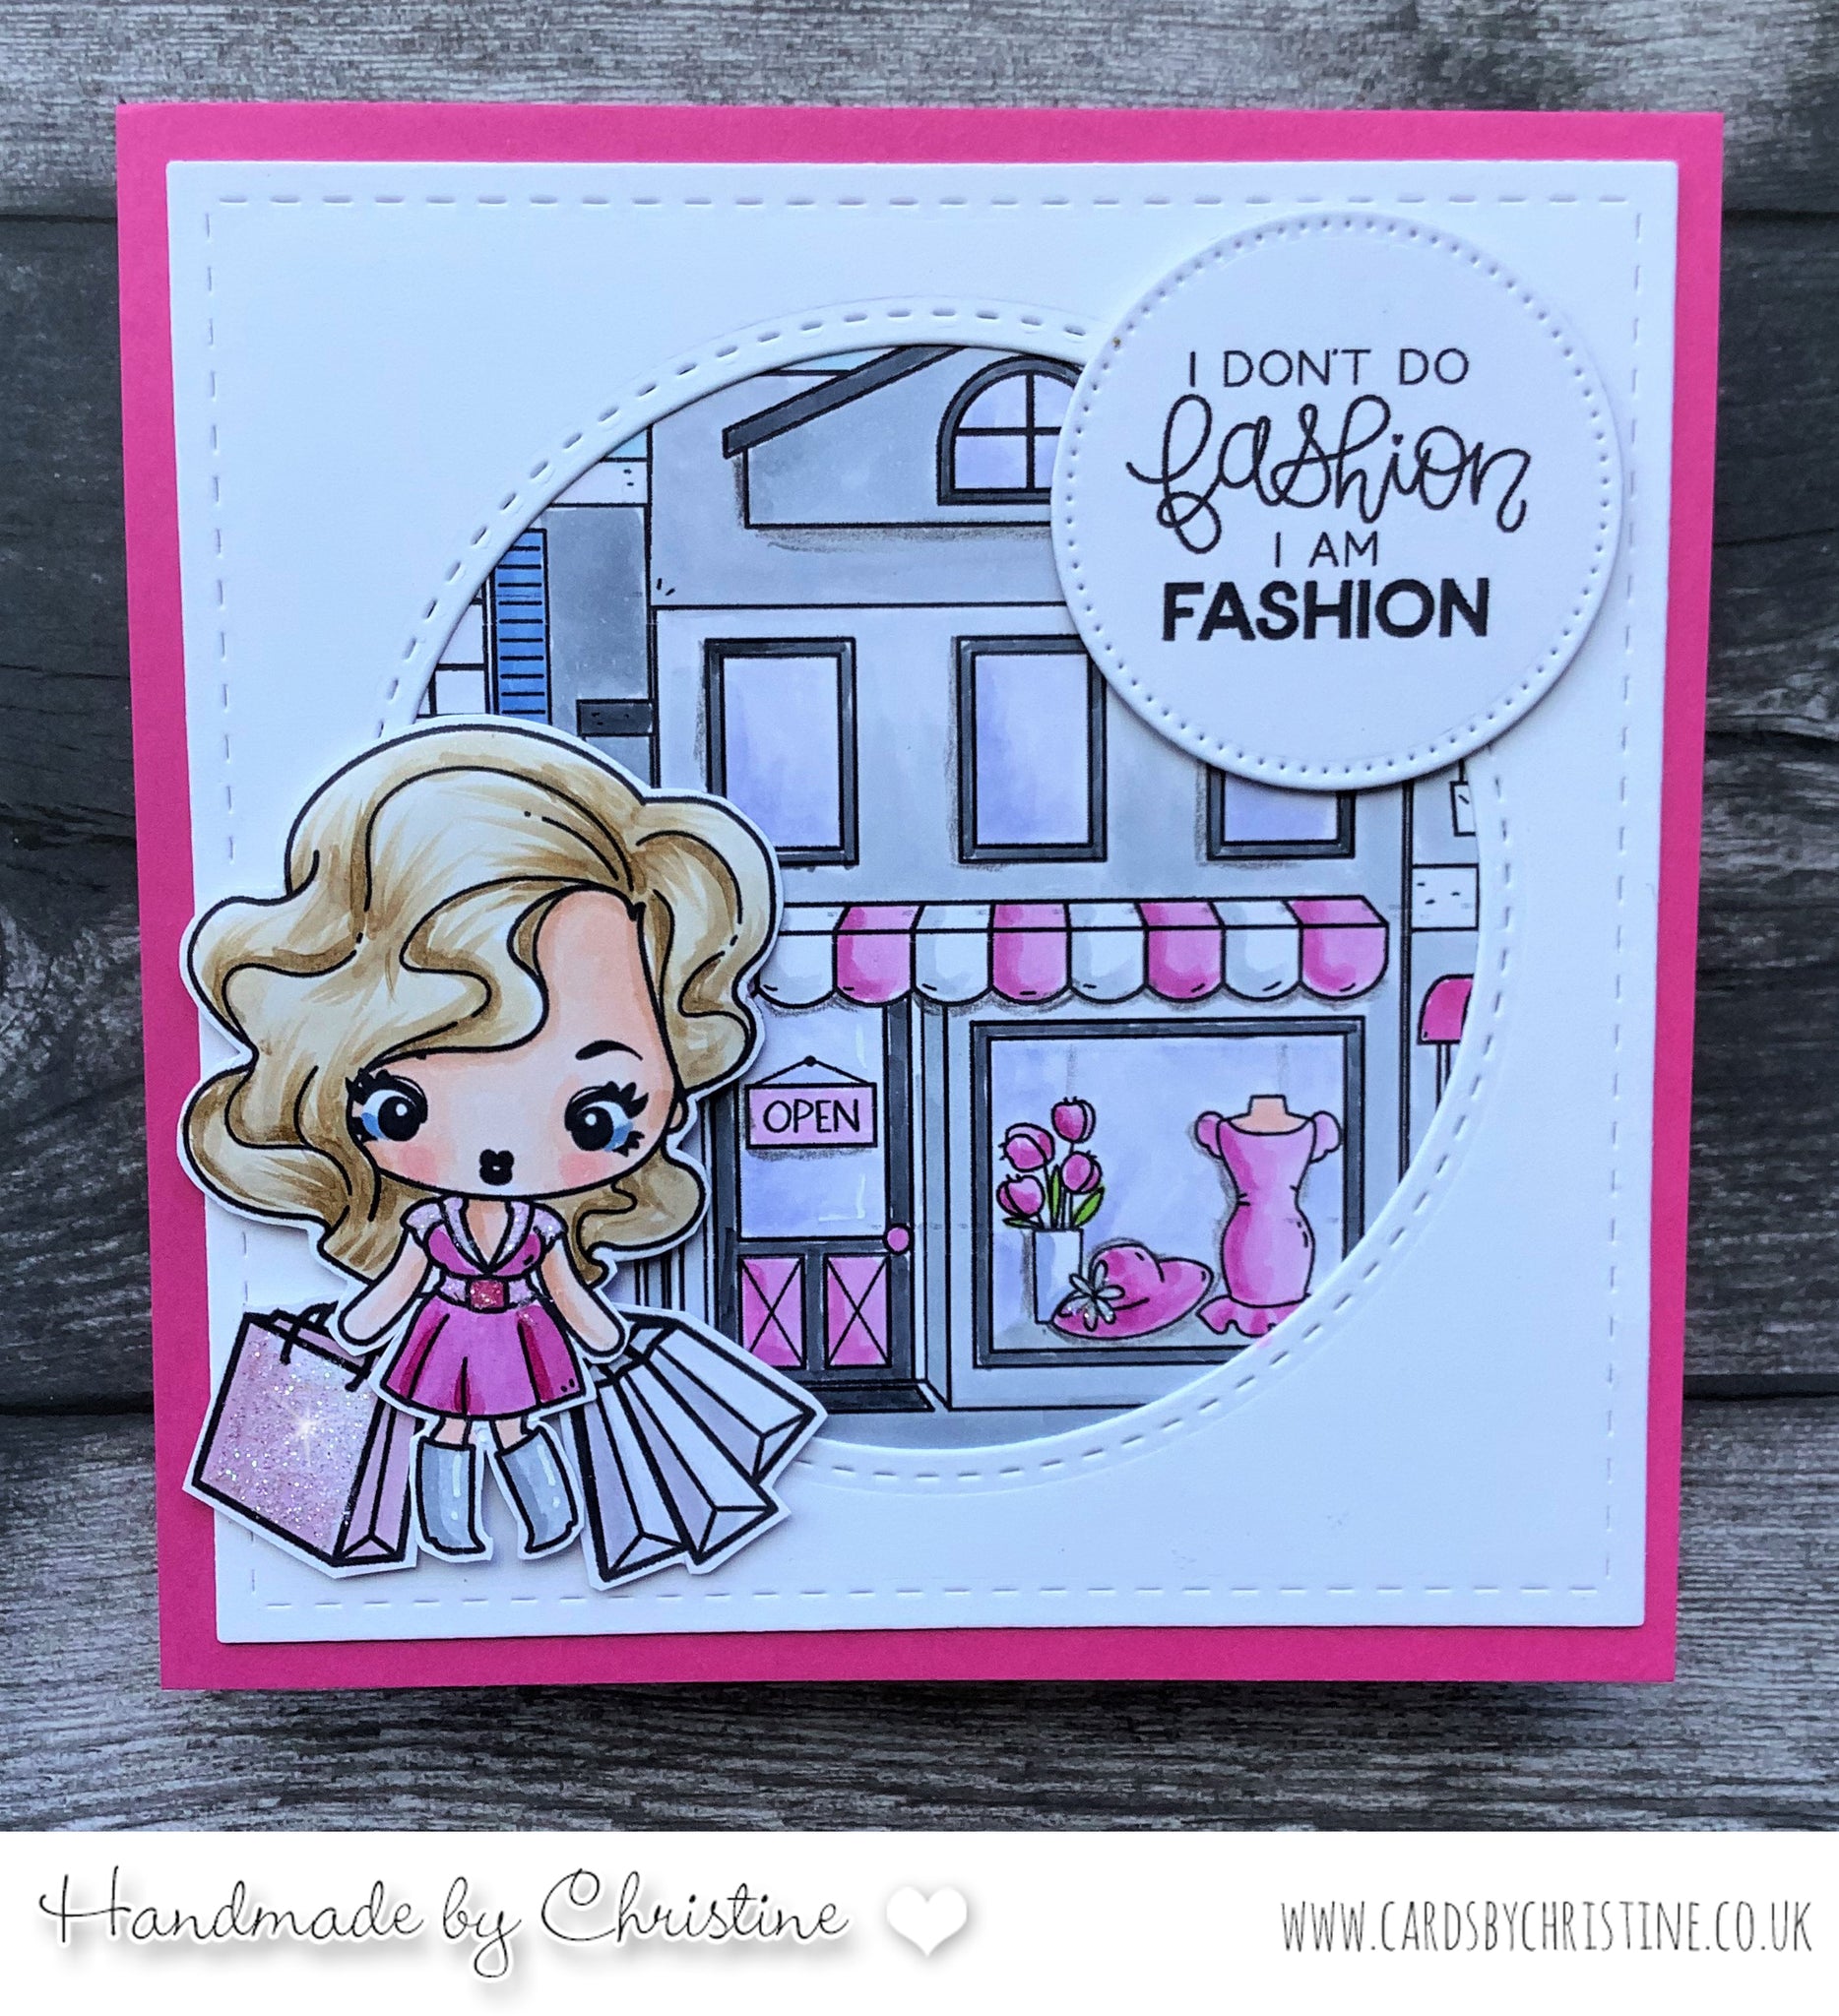 Guest Designer Christine with Cheeky Shop! – The Greeting Farm